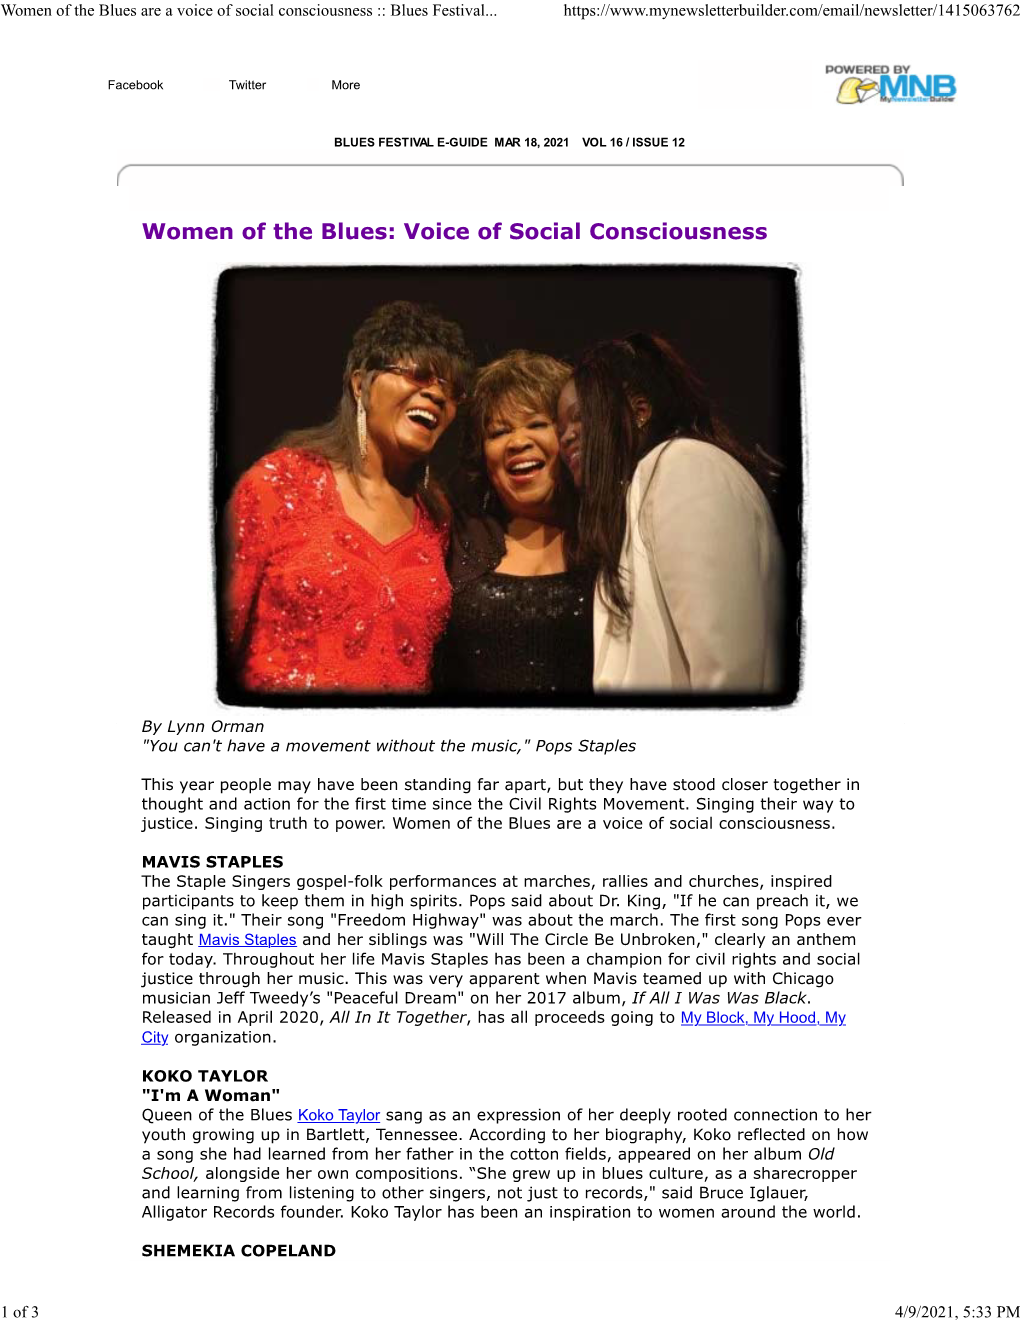 Women of the Blues Are a Voice of Social Consciousness :: Blues Festival Guide | Mynewsletterbuilder